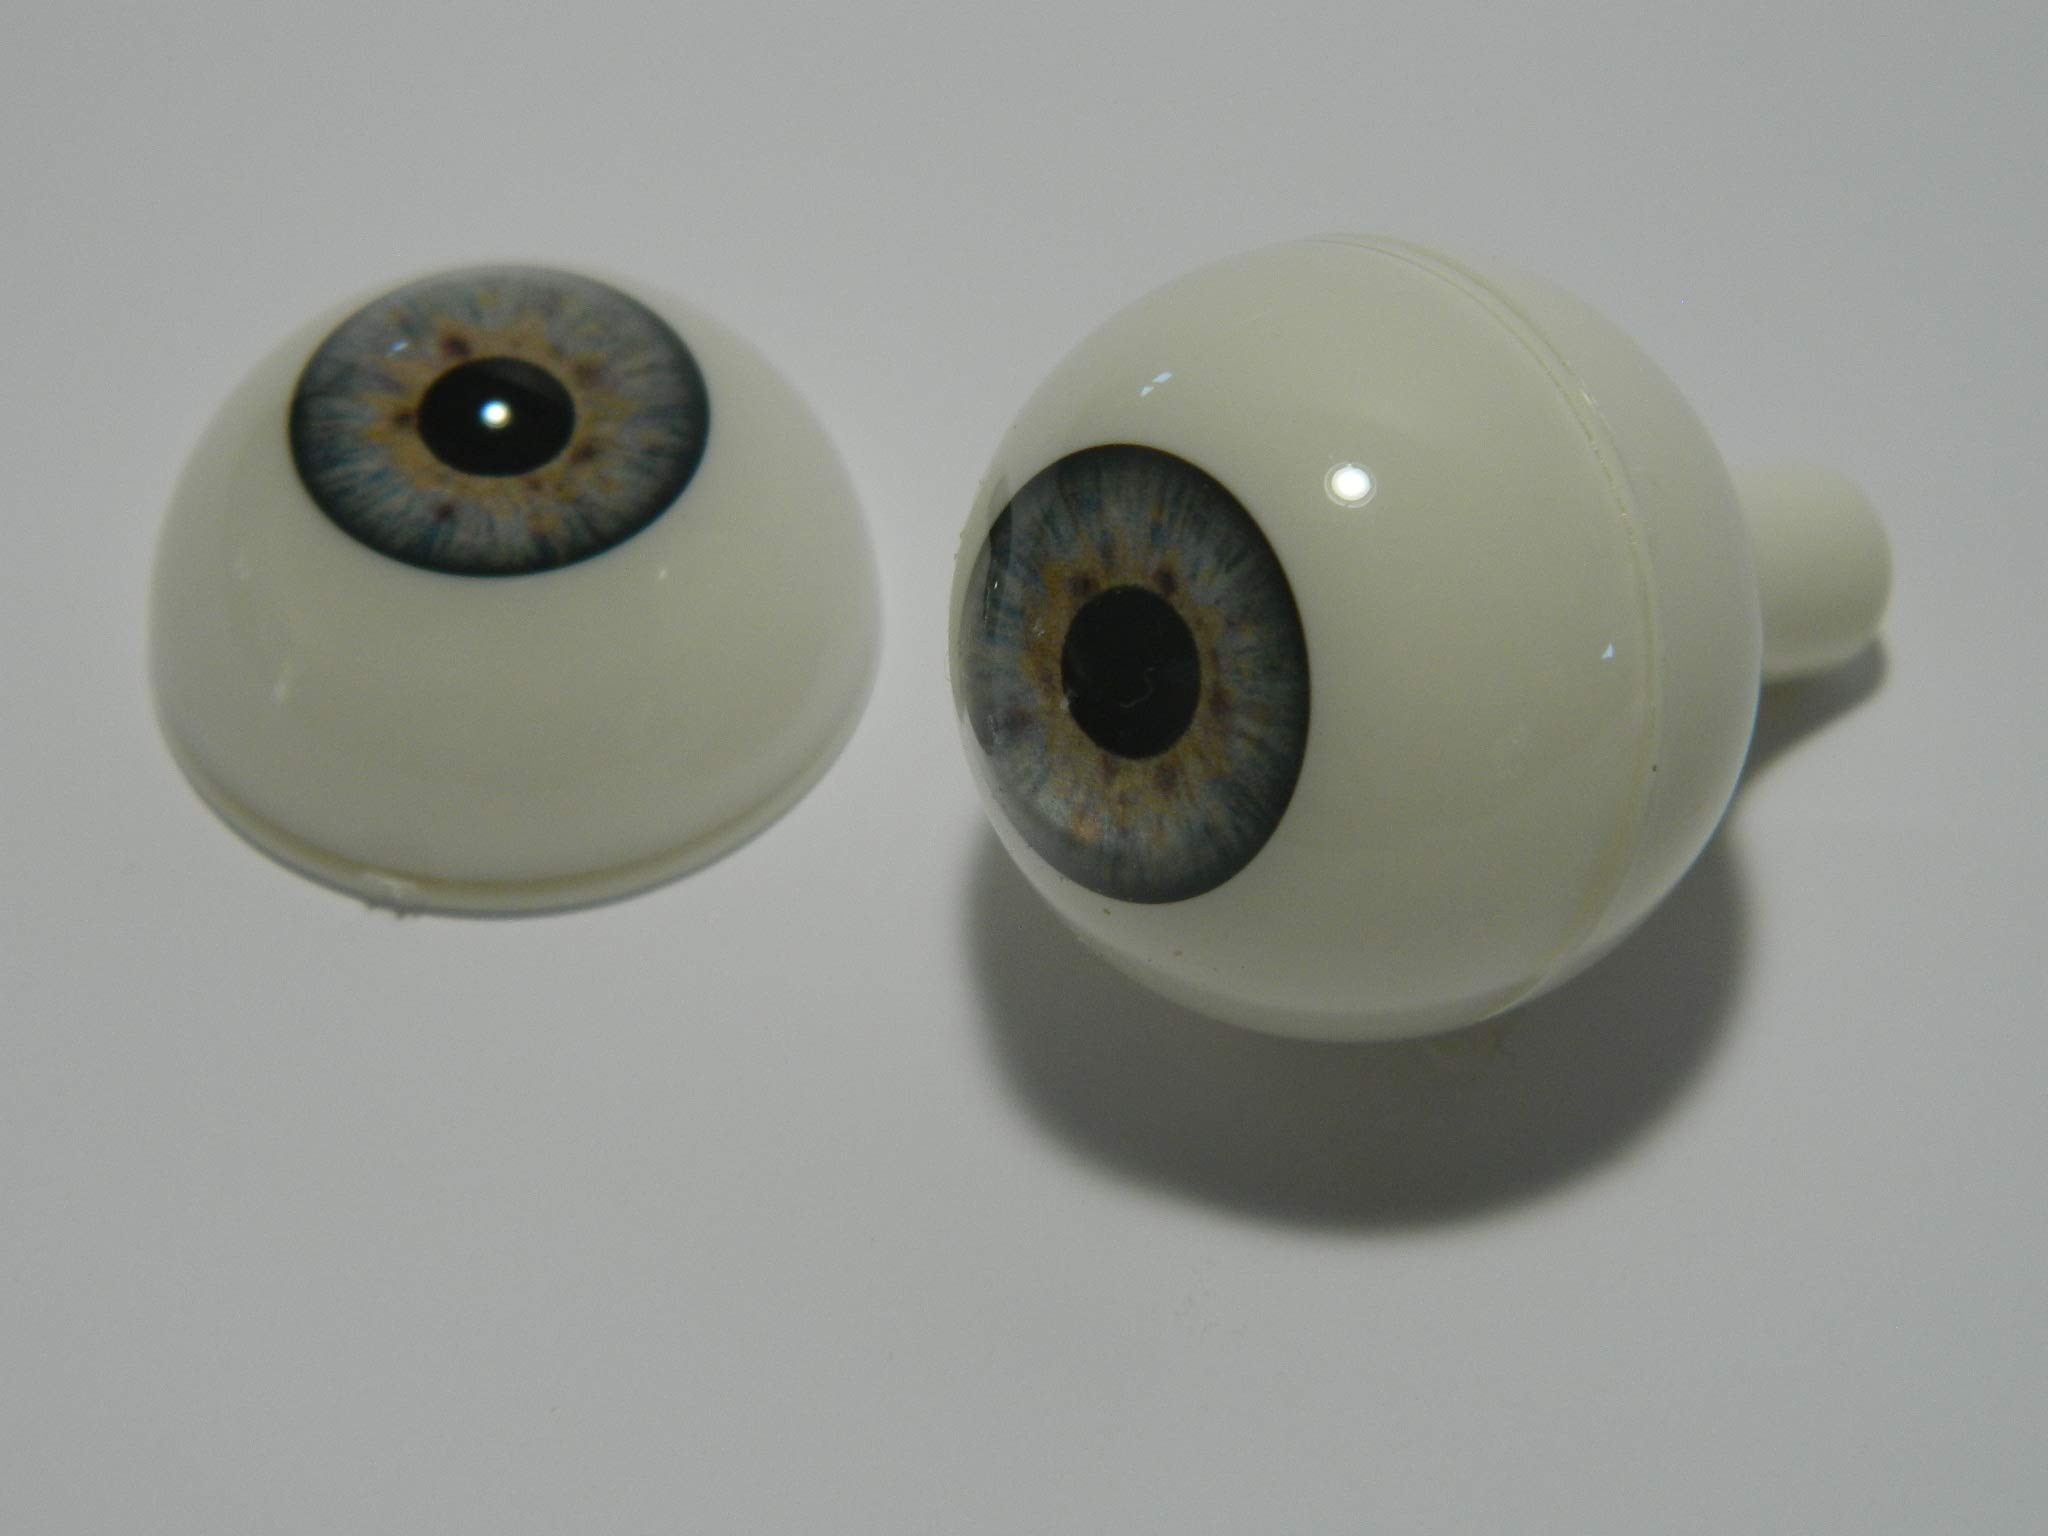 Dead Head Props Pair of Premium Realistic Life Size Acrylic Eyes for Halloween Props, Masks, Dolls or Bears (Blue 26mm)